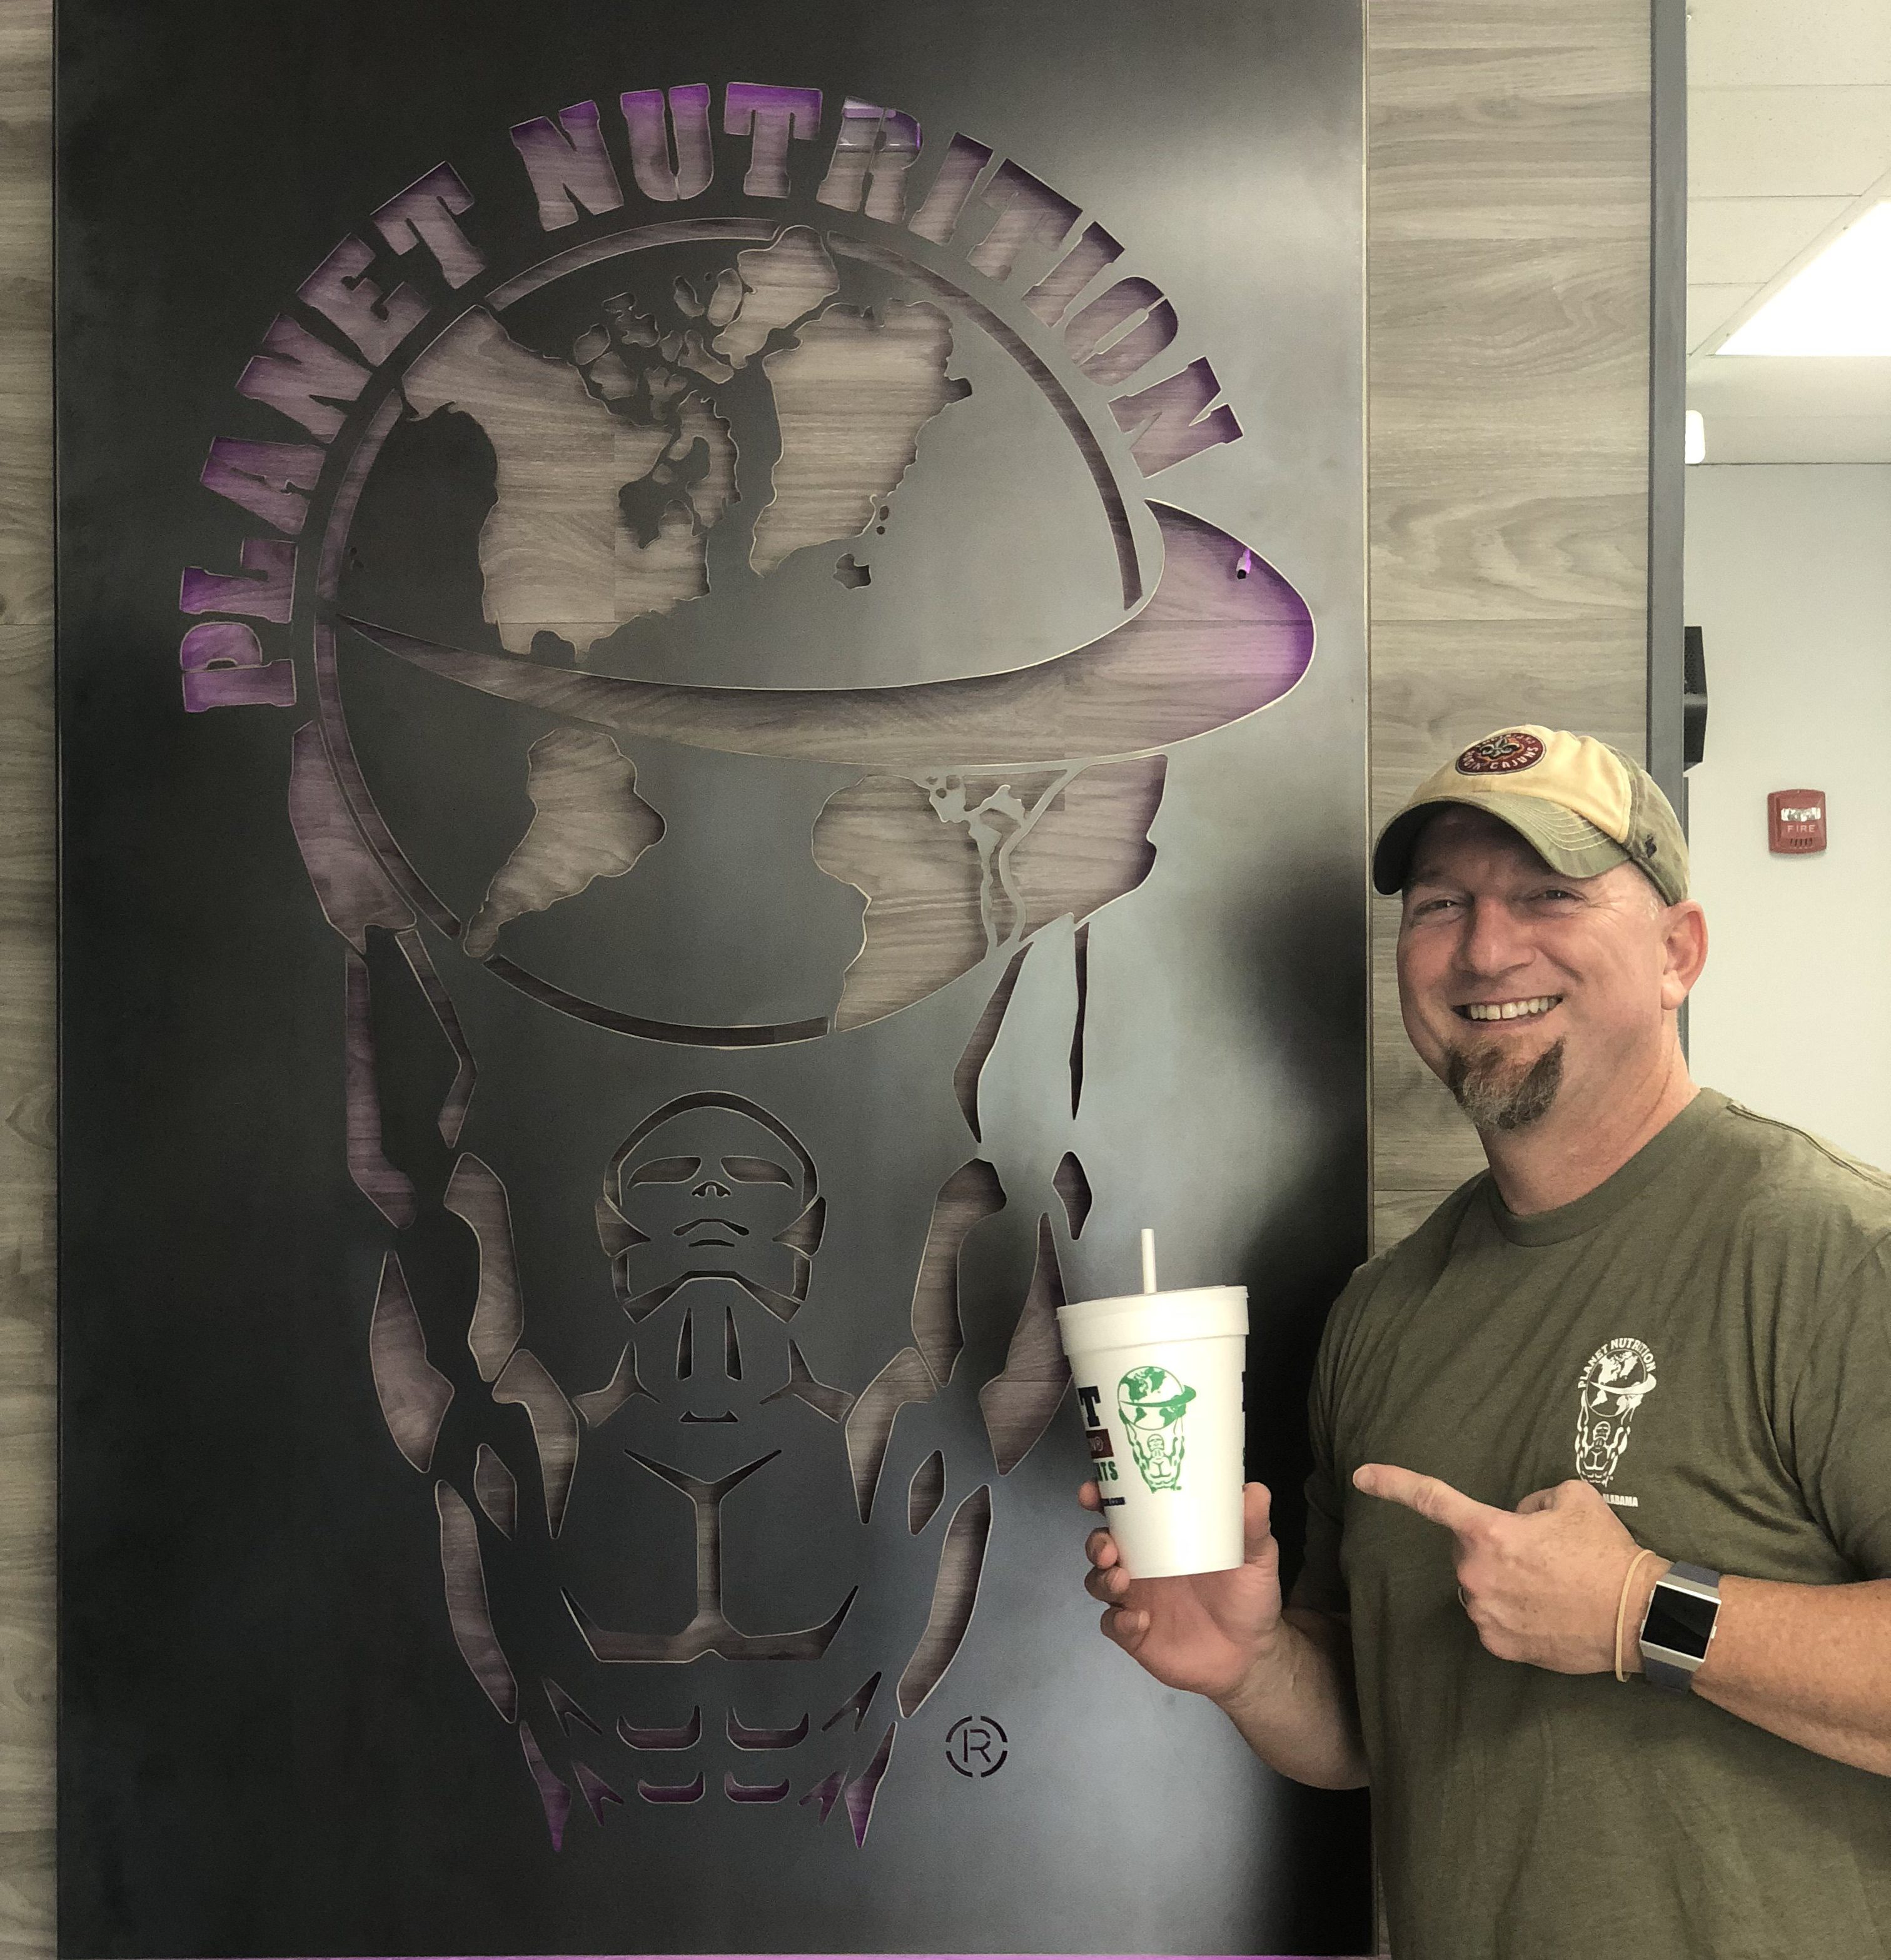 Planet Nutrition opens with vision to help community achieve fitness, health goals